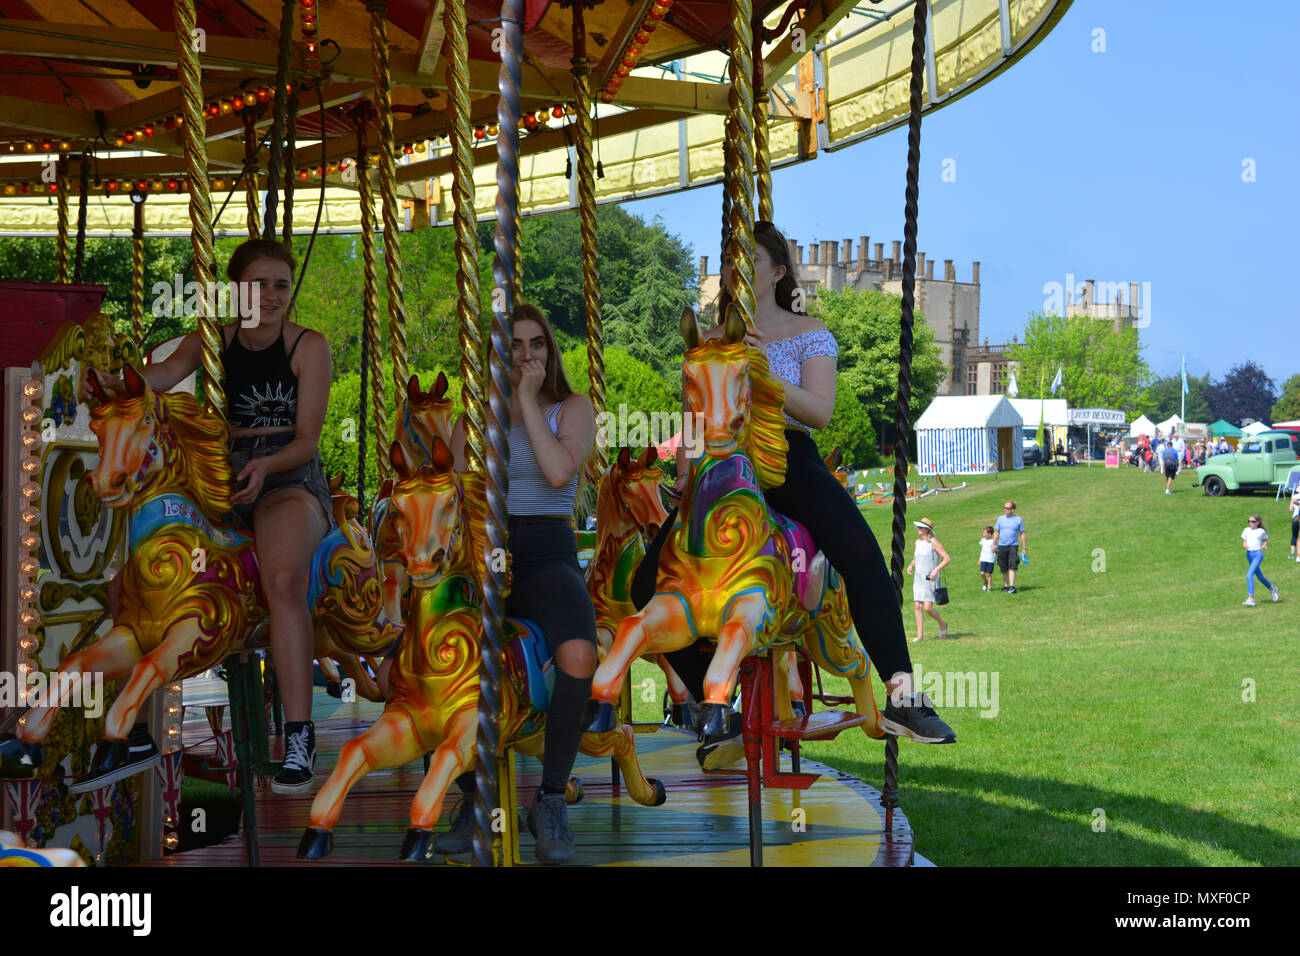 Teenage girls riding horses on a merry-go-round at the annual Sherborne Castle Country Fair, Sherborne, Dorset, England Stock Photo